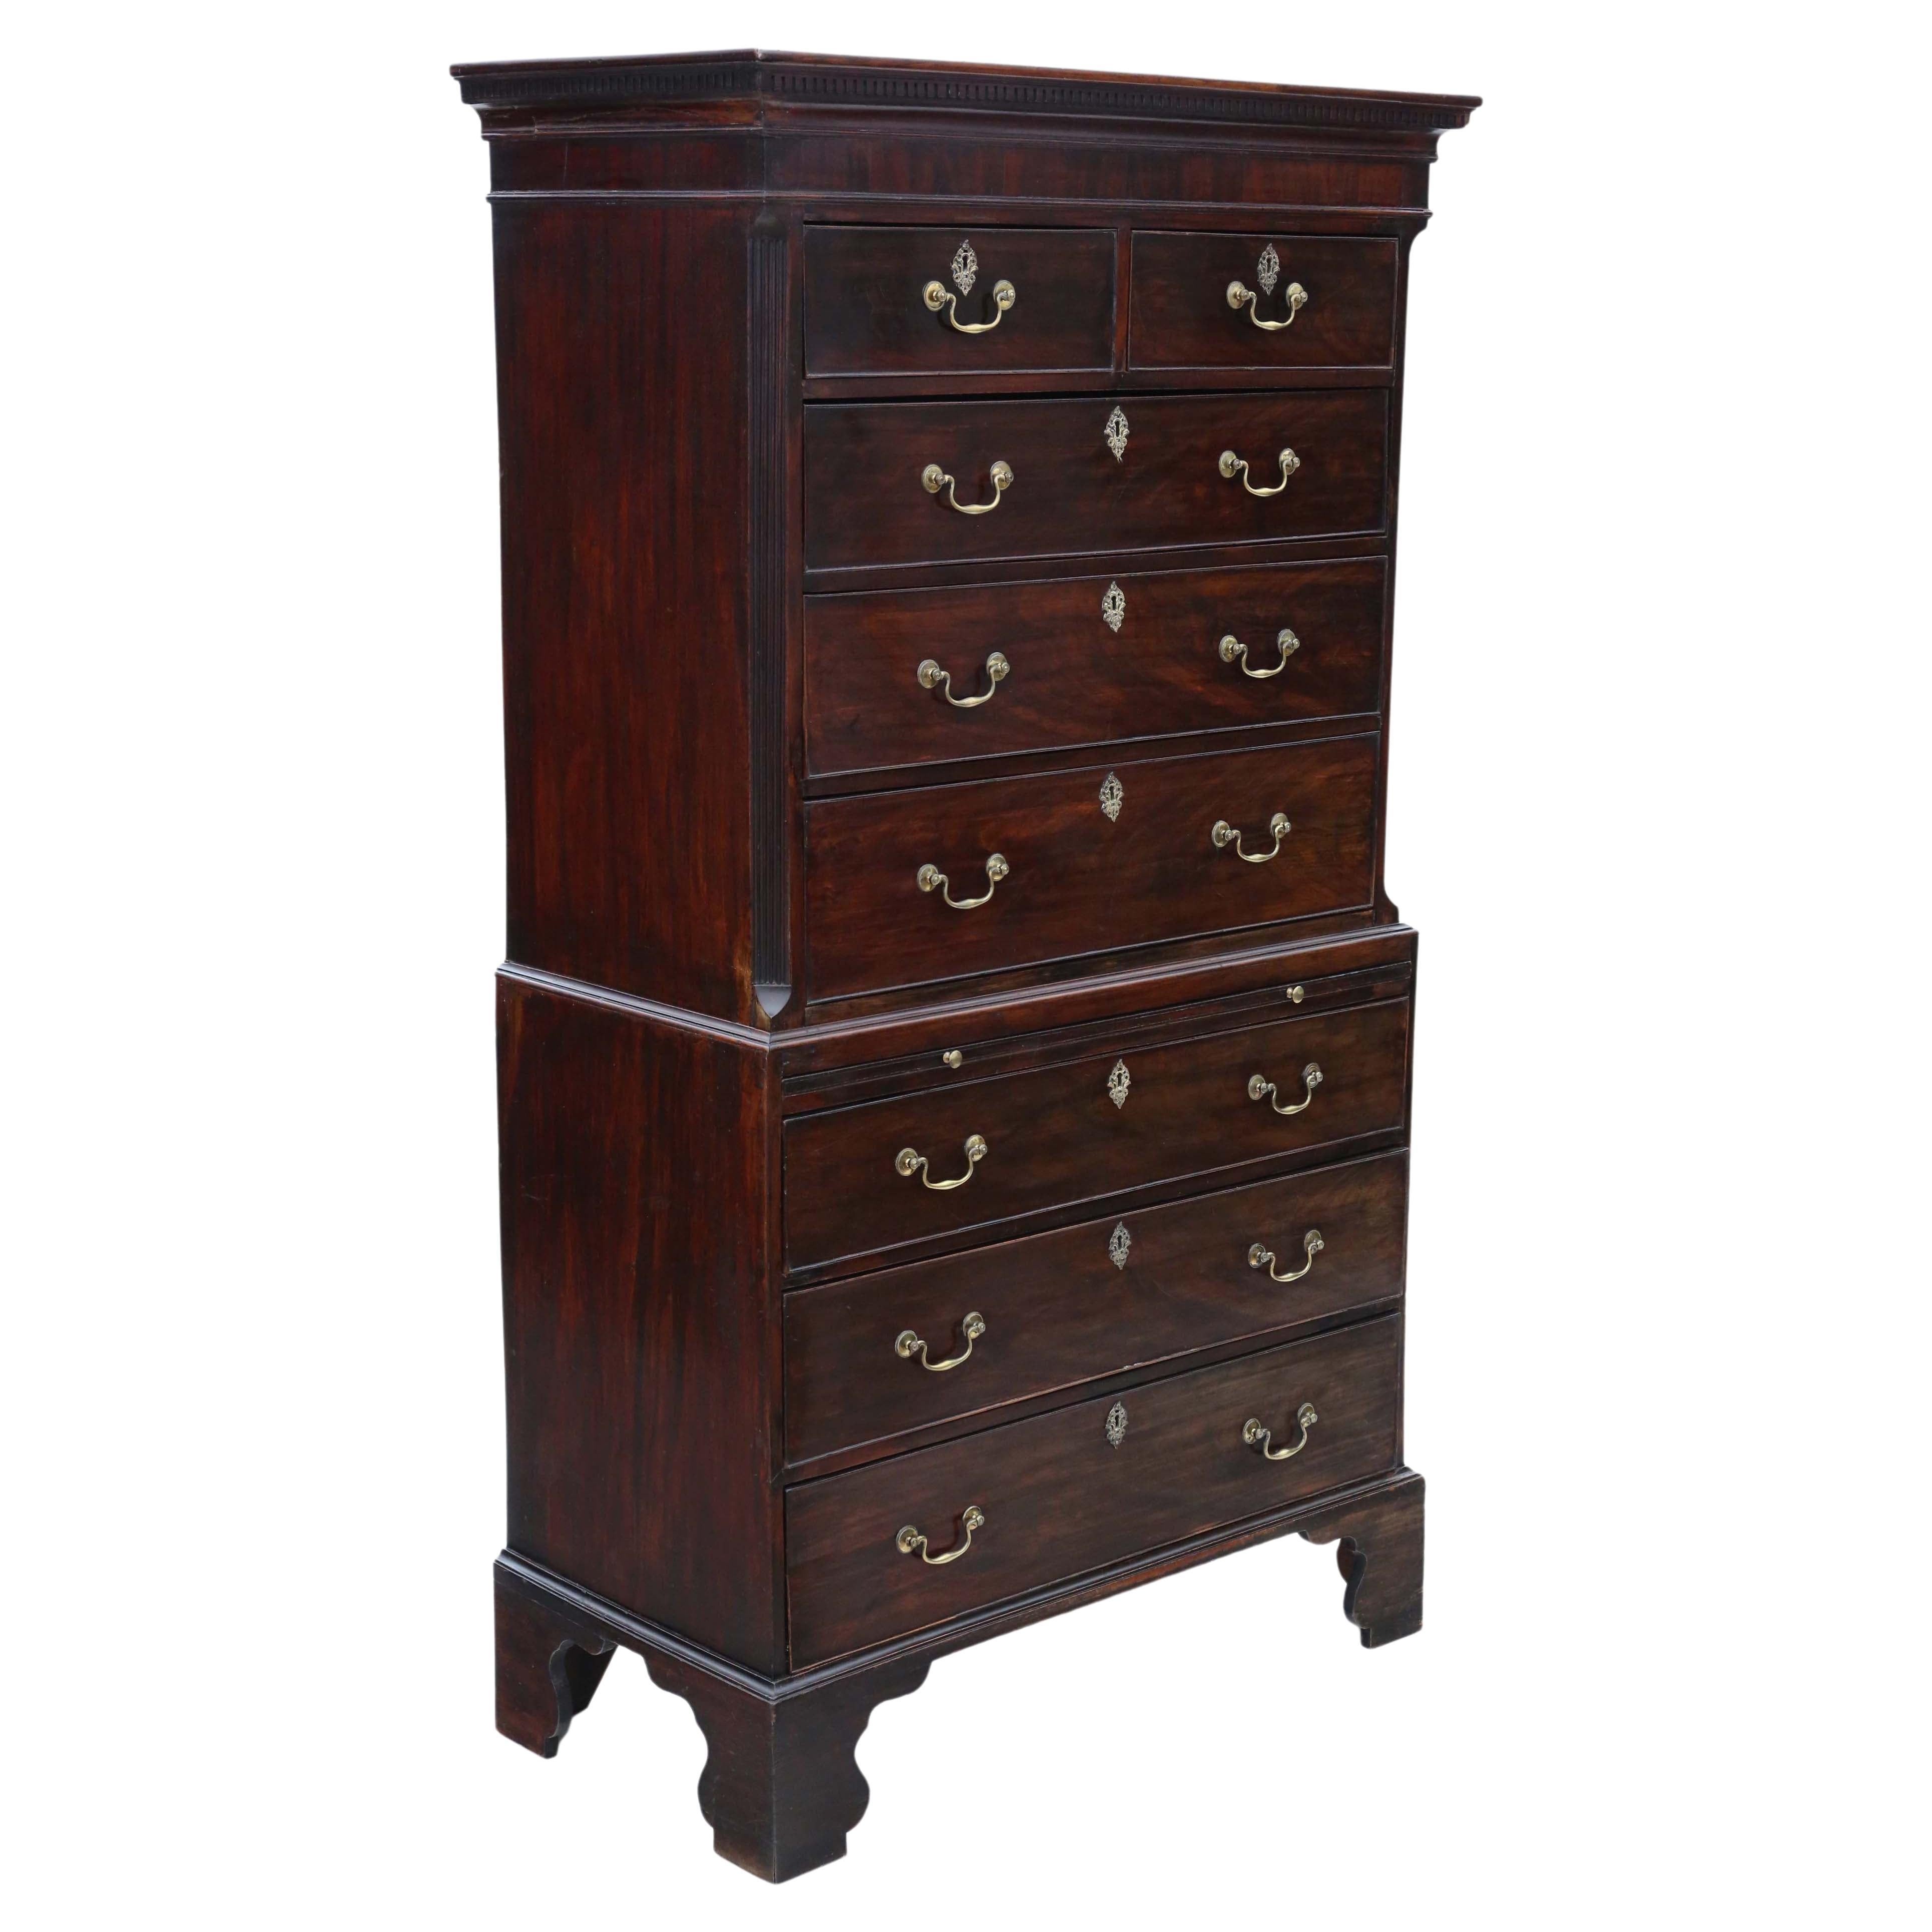 Antique 18th Century mahogany tallboy chest on chest of drawers For Sale